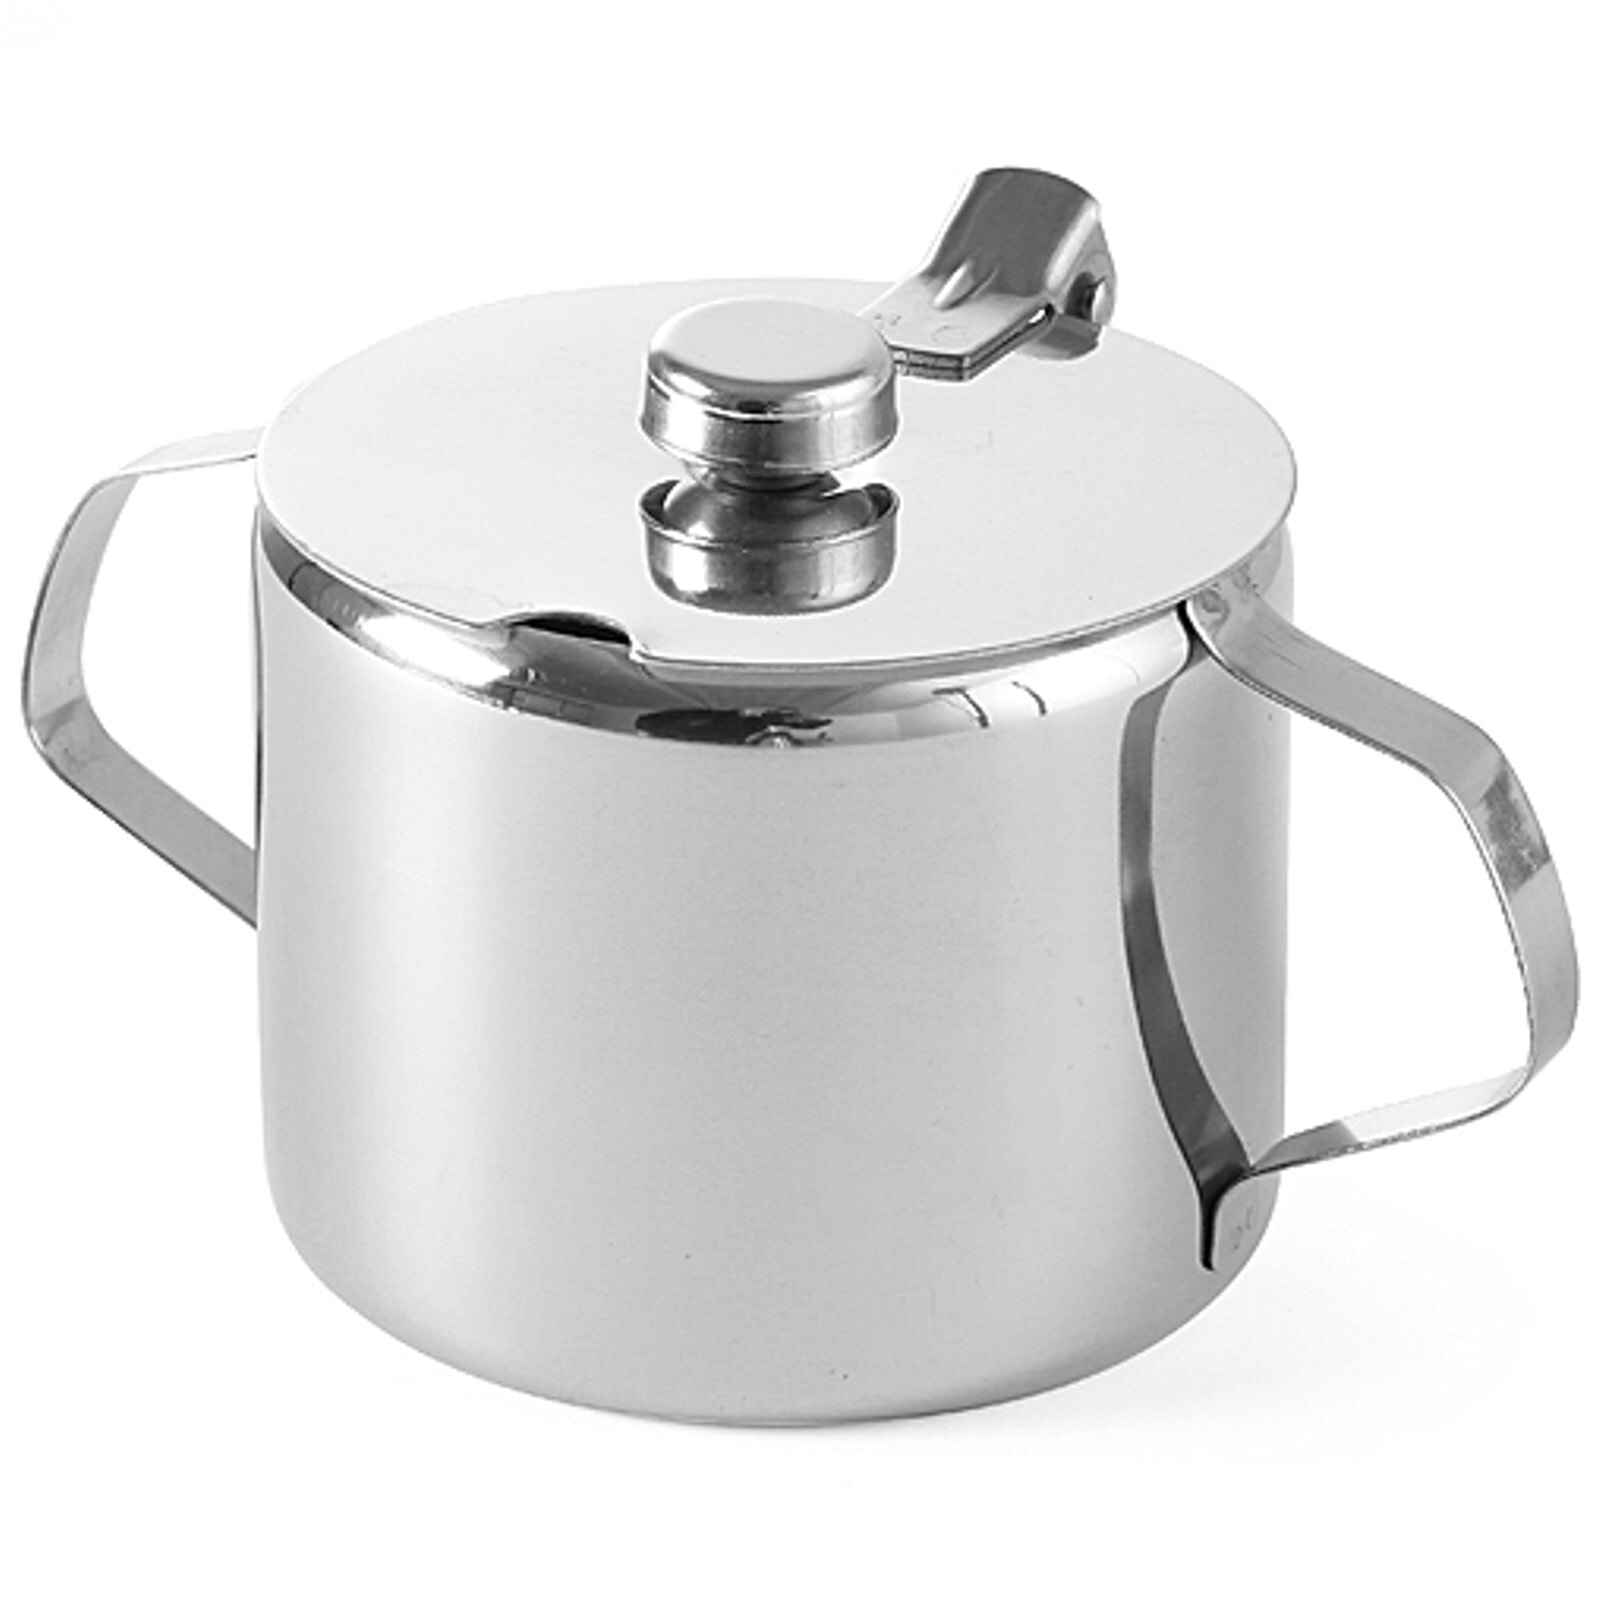 Stainless steel sugar bowl with a lid, diam. 85mm 300ml - Hendi 452103